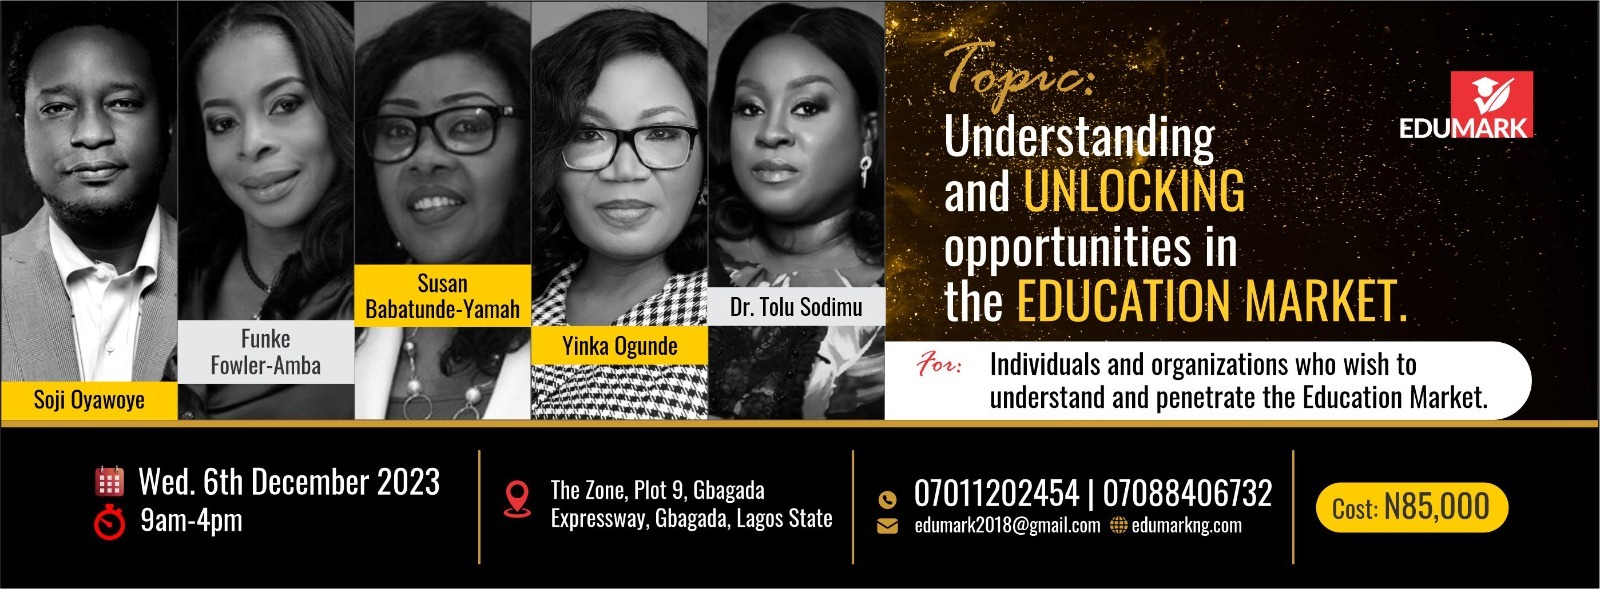 EDUMARK to hold Seminar on “Understanding and Unlocking Opportunities in the Education Market”